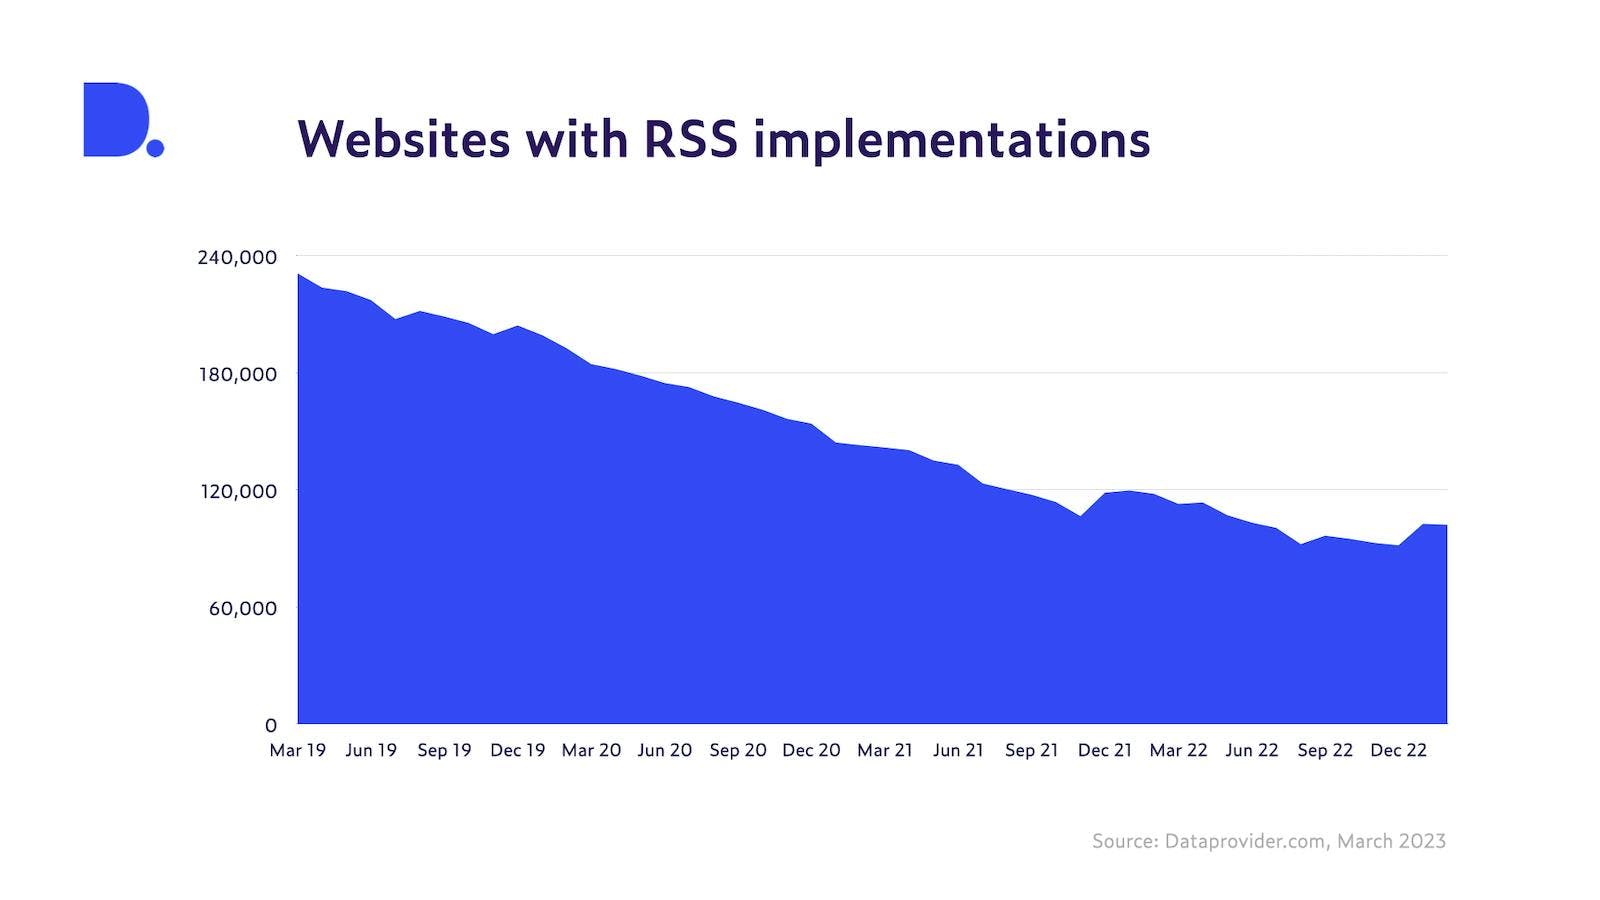 Websites with RSS implementations. Source: Dataprovider.com, March 2023